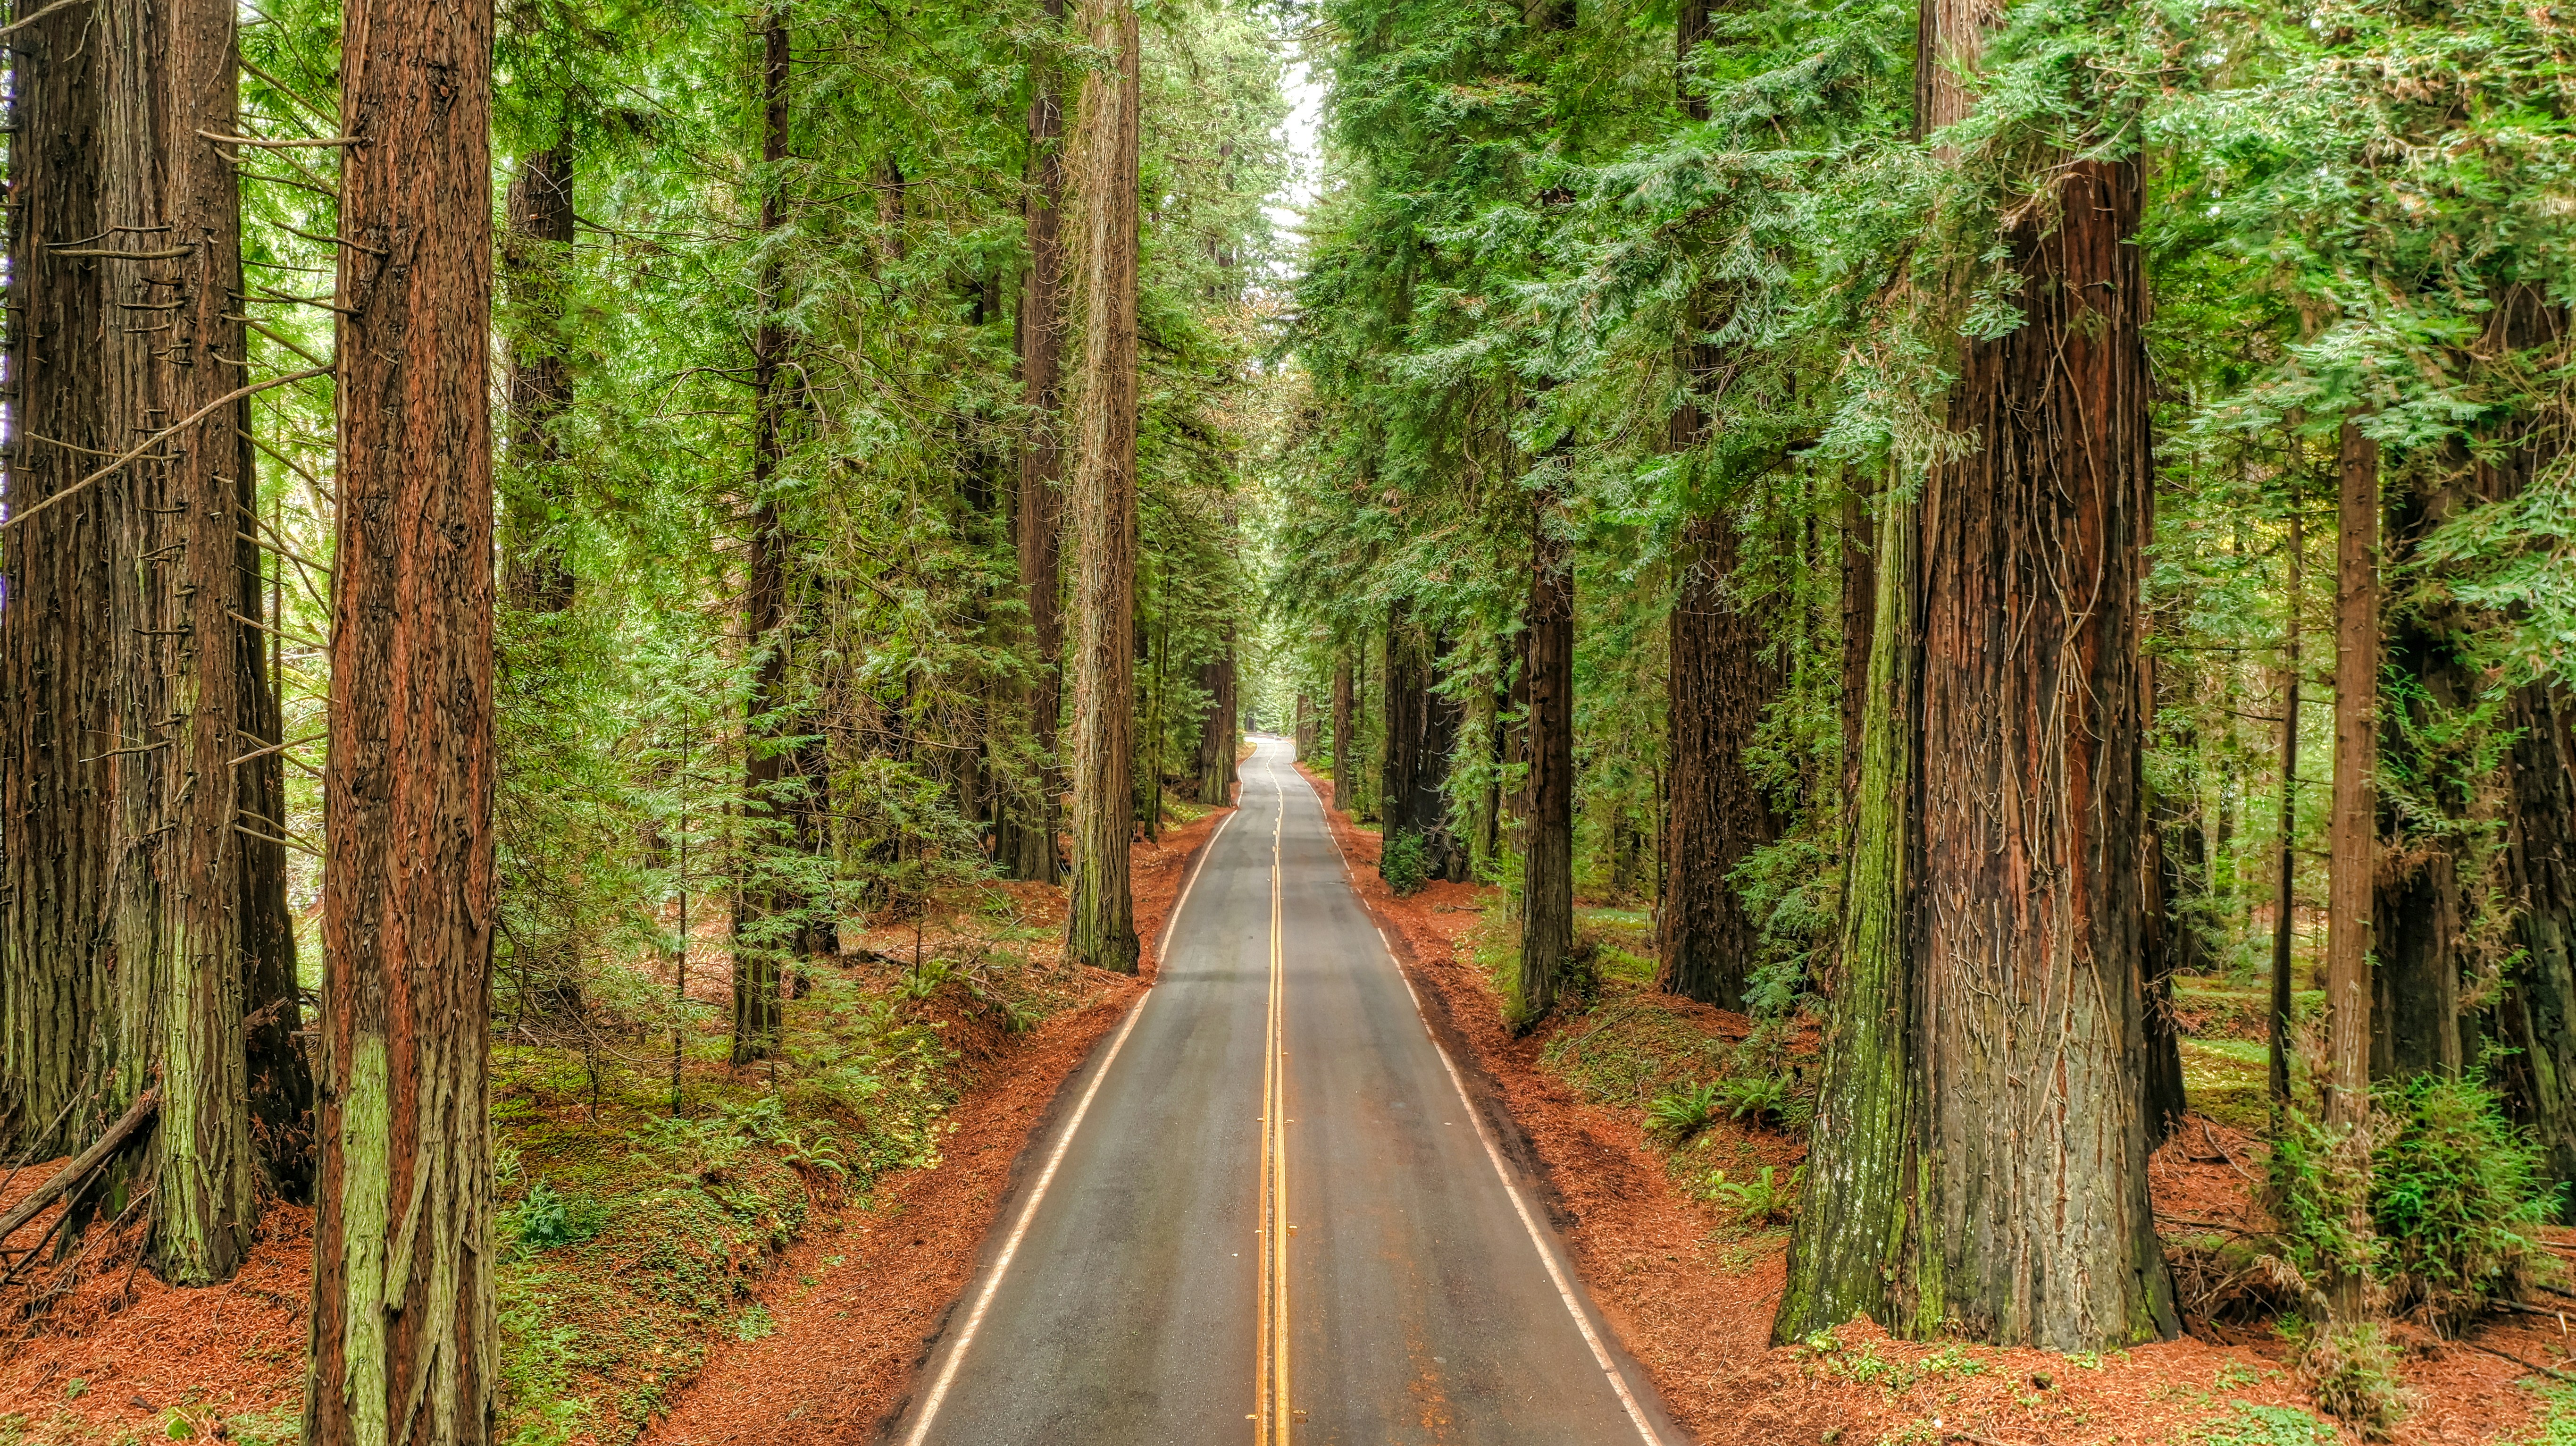 General 5460x3064 nature trees road asphalt grass plants fallen leaves forest redwood The Avenue of the Giants California USA